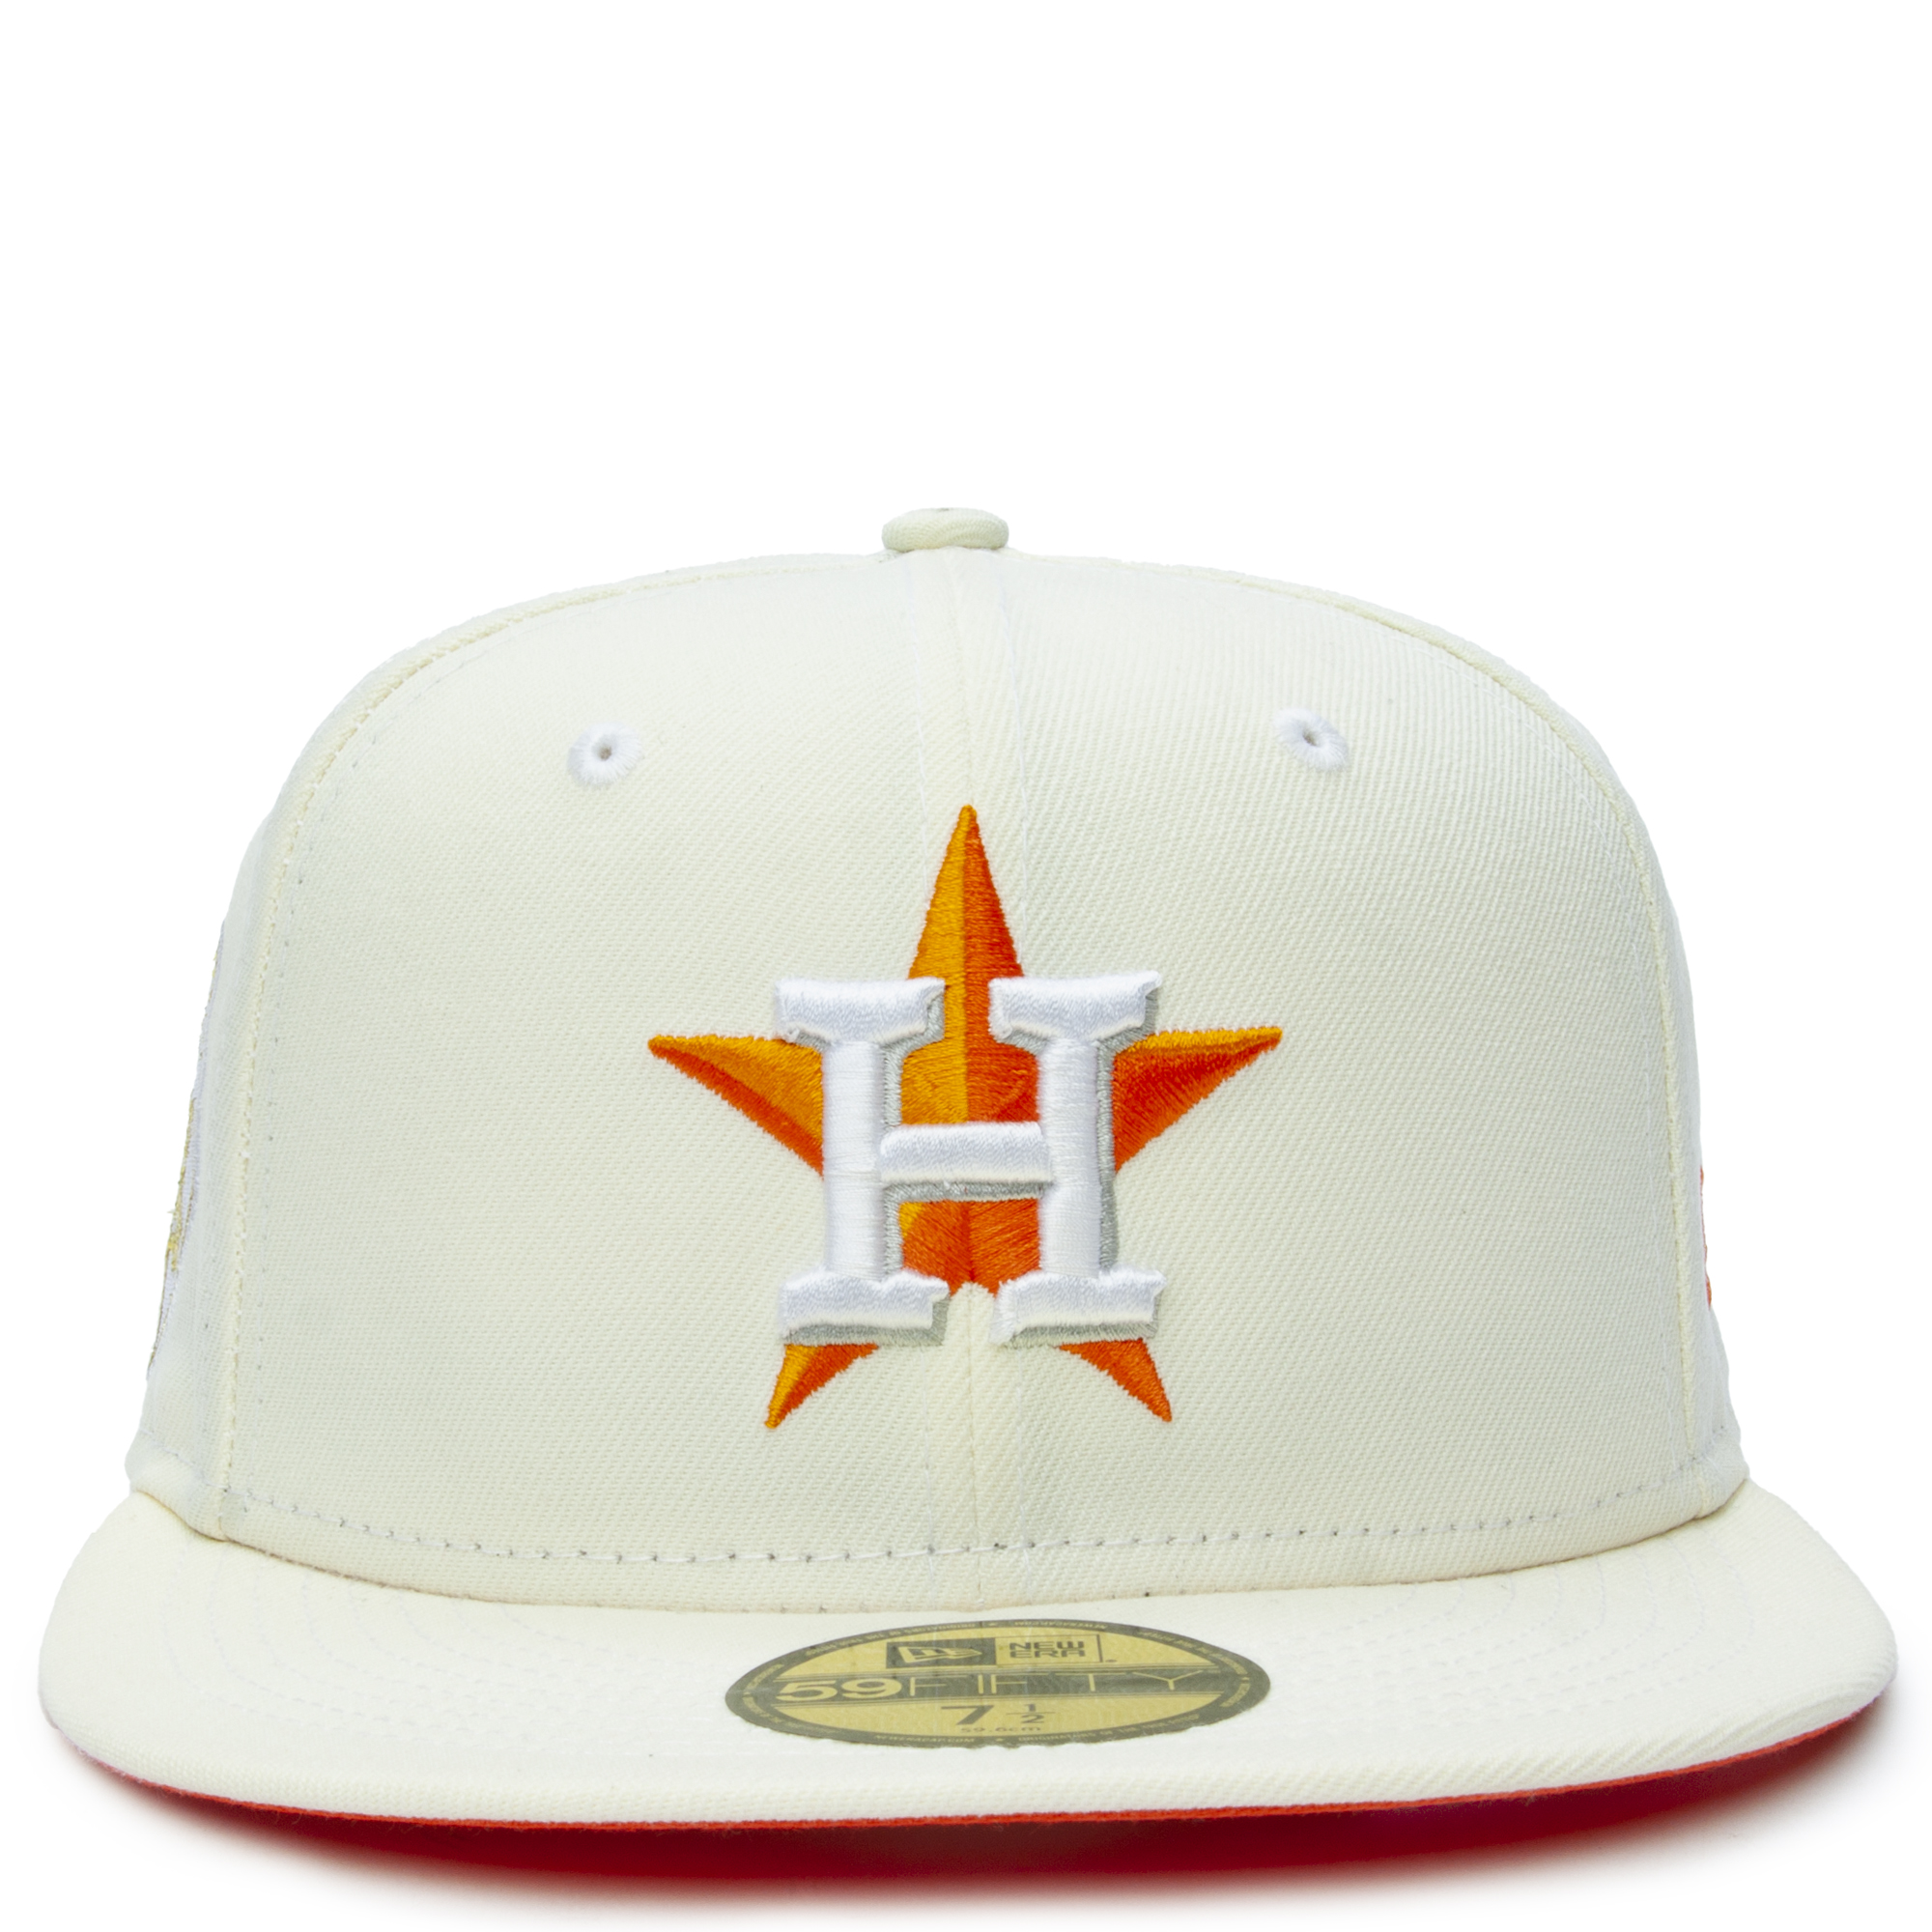 NEW ERA CAPS Houston Astros Chrome 59FIFTY Fitted Hat 70714833